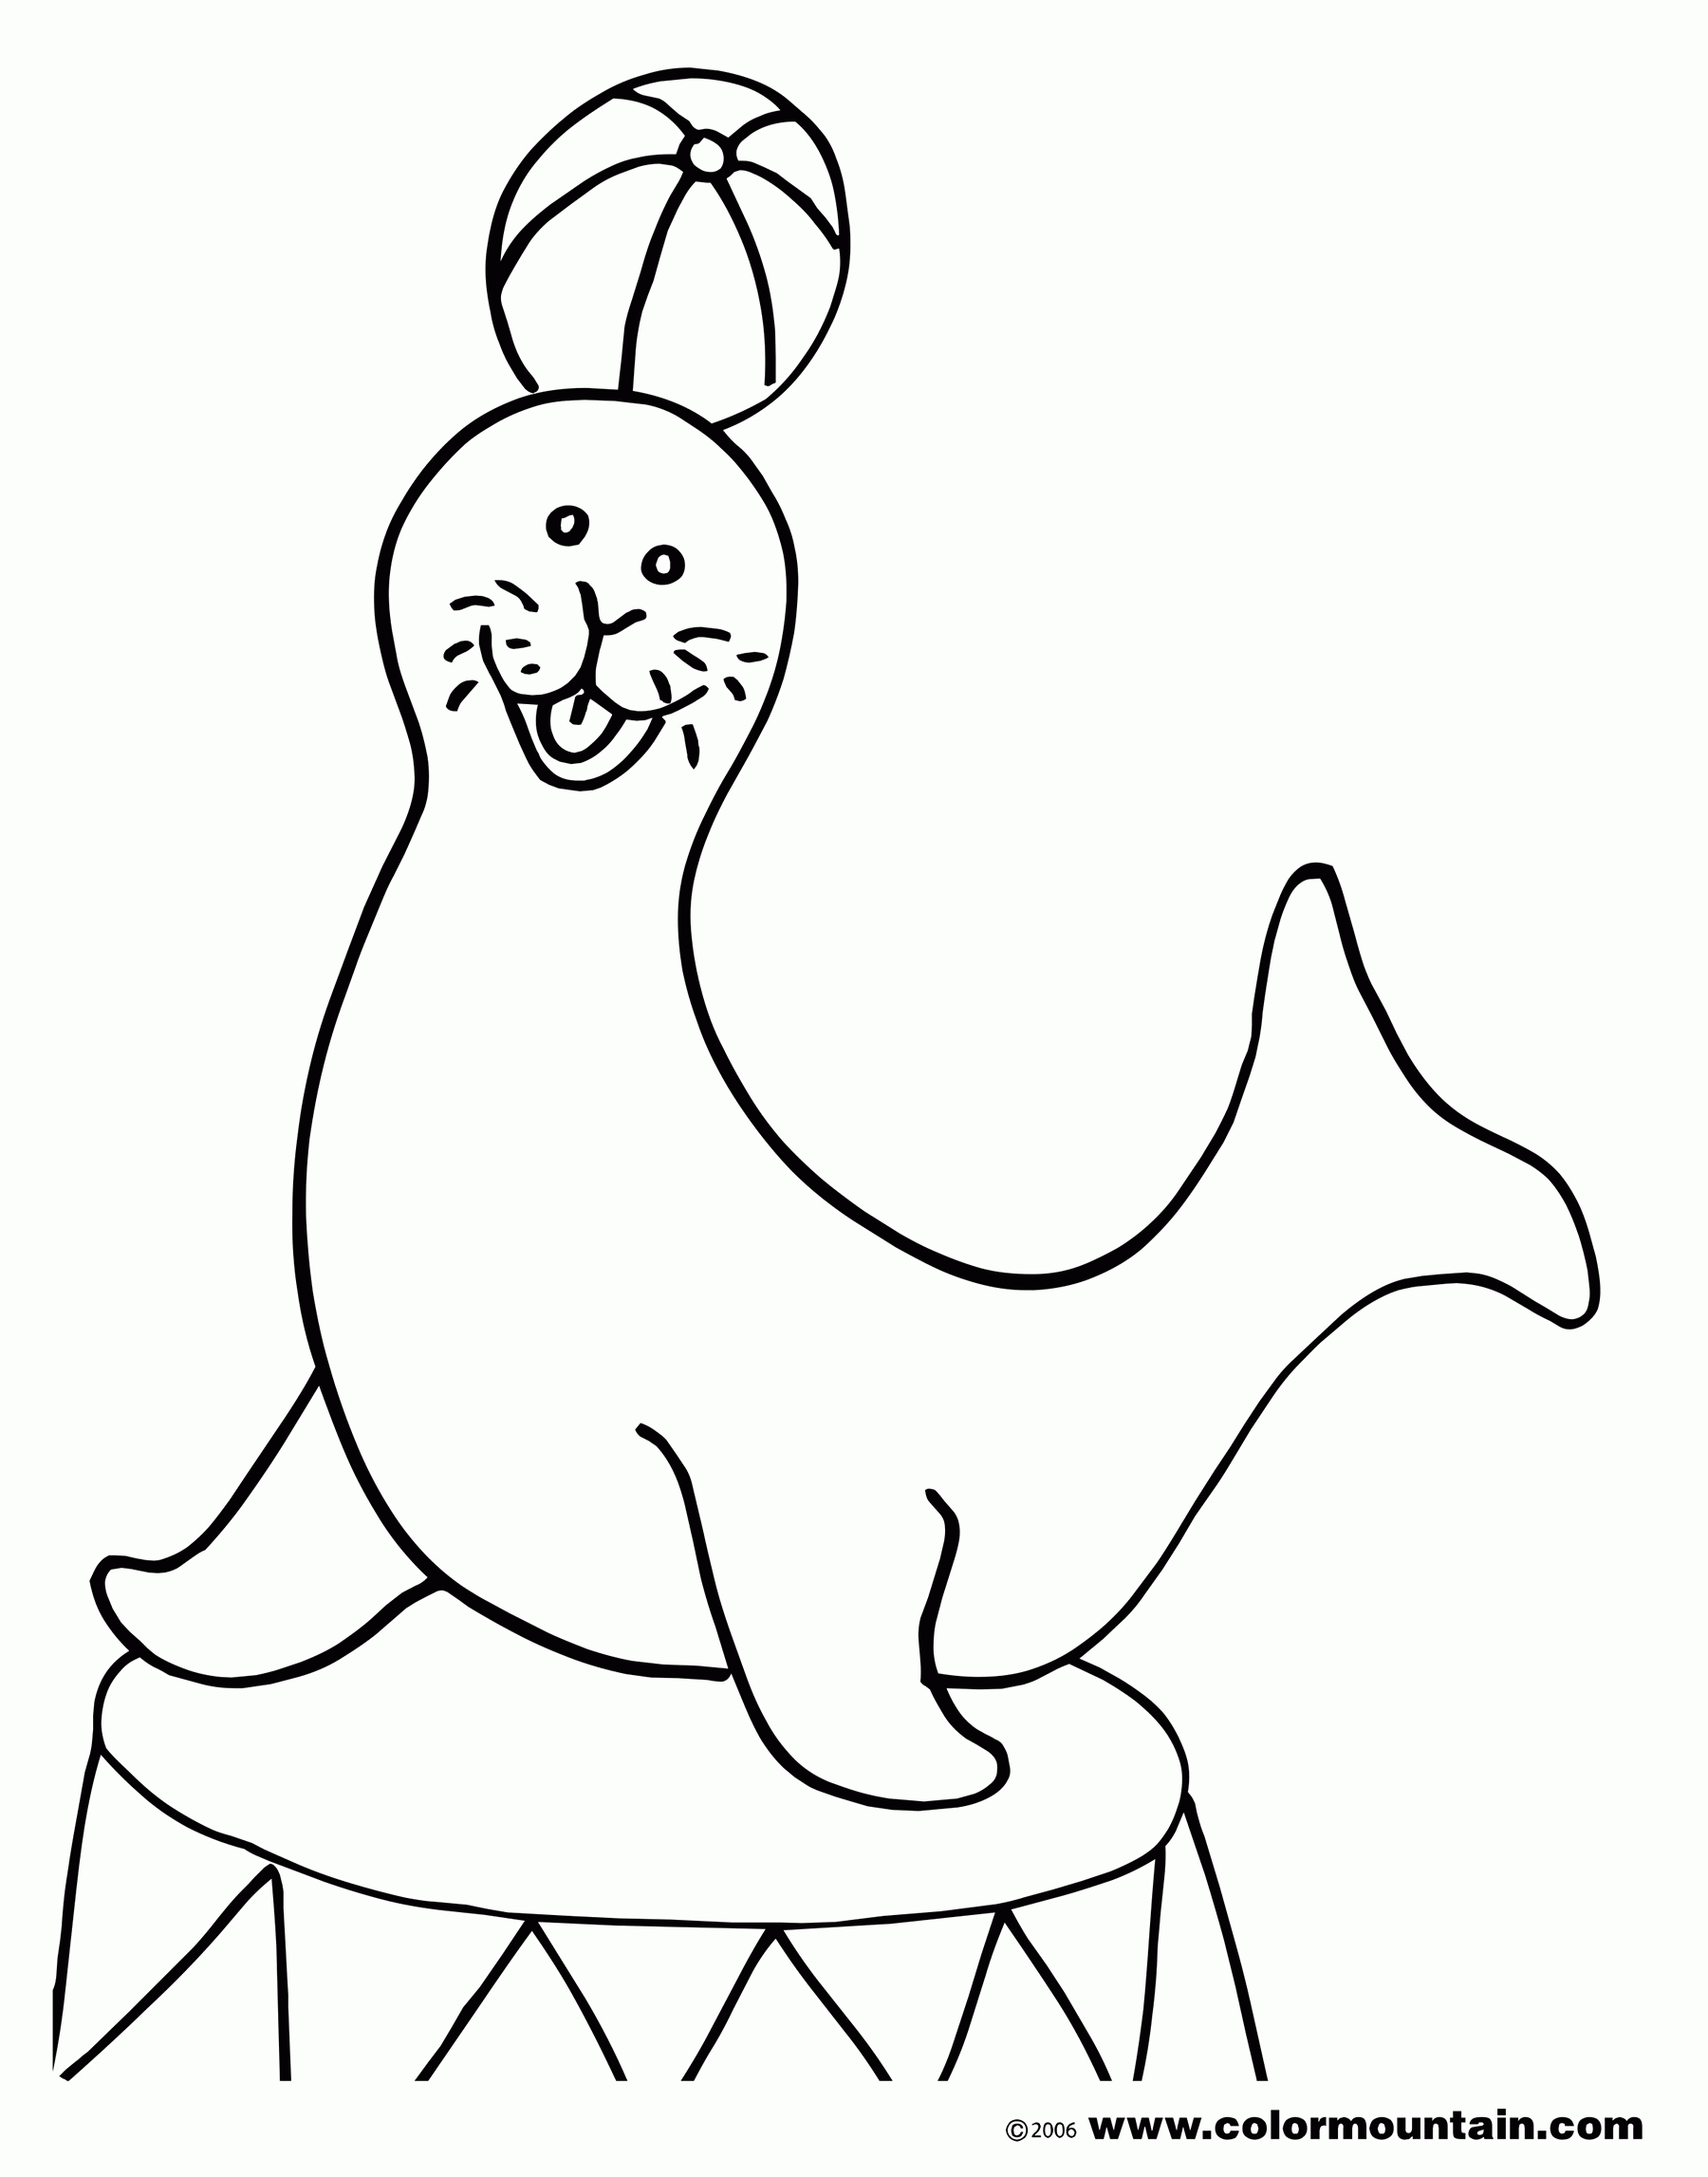 Animal Jam Seal Coloring Pages - Coloring Pages For All Ages